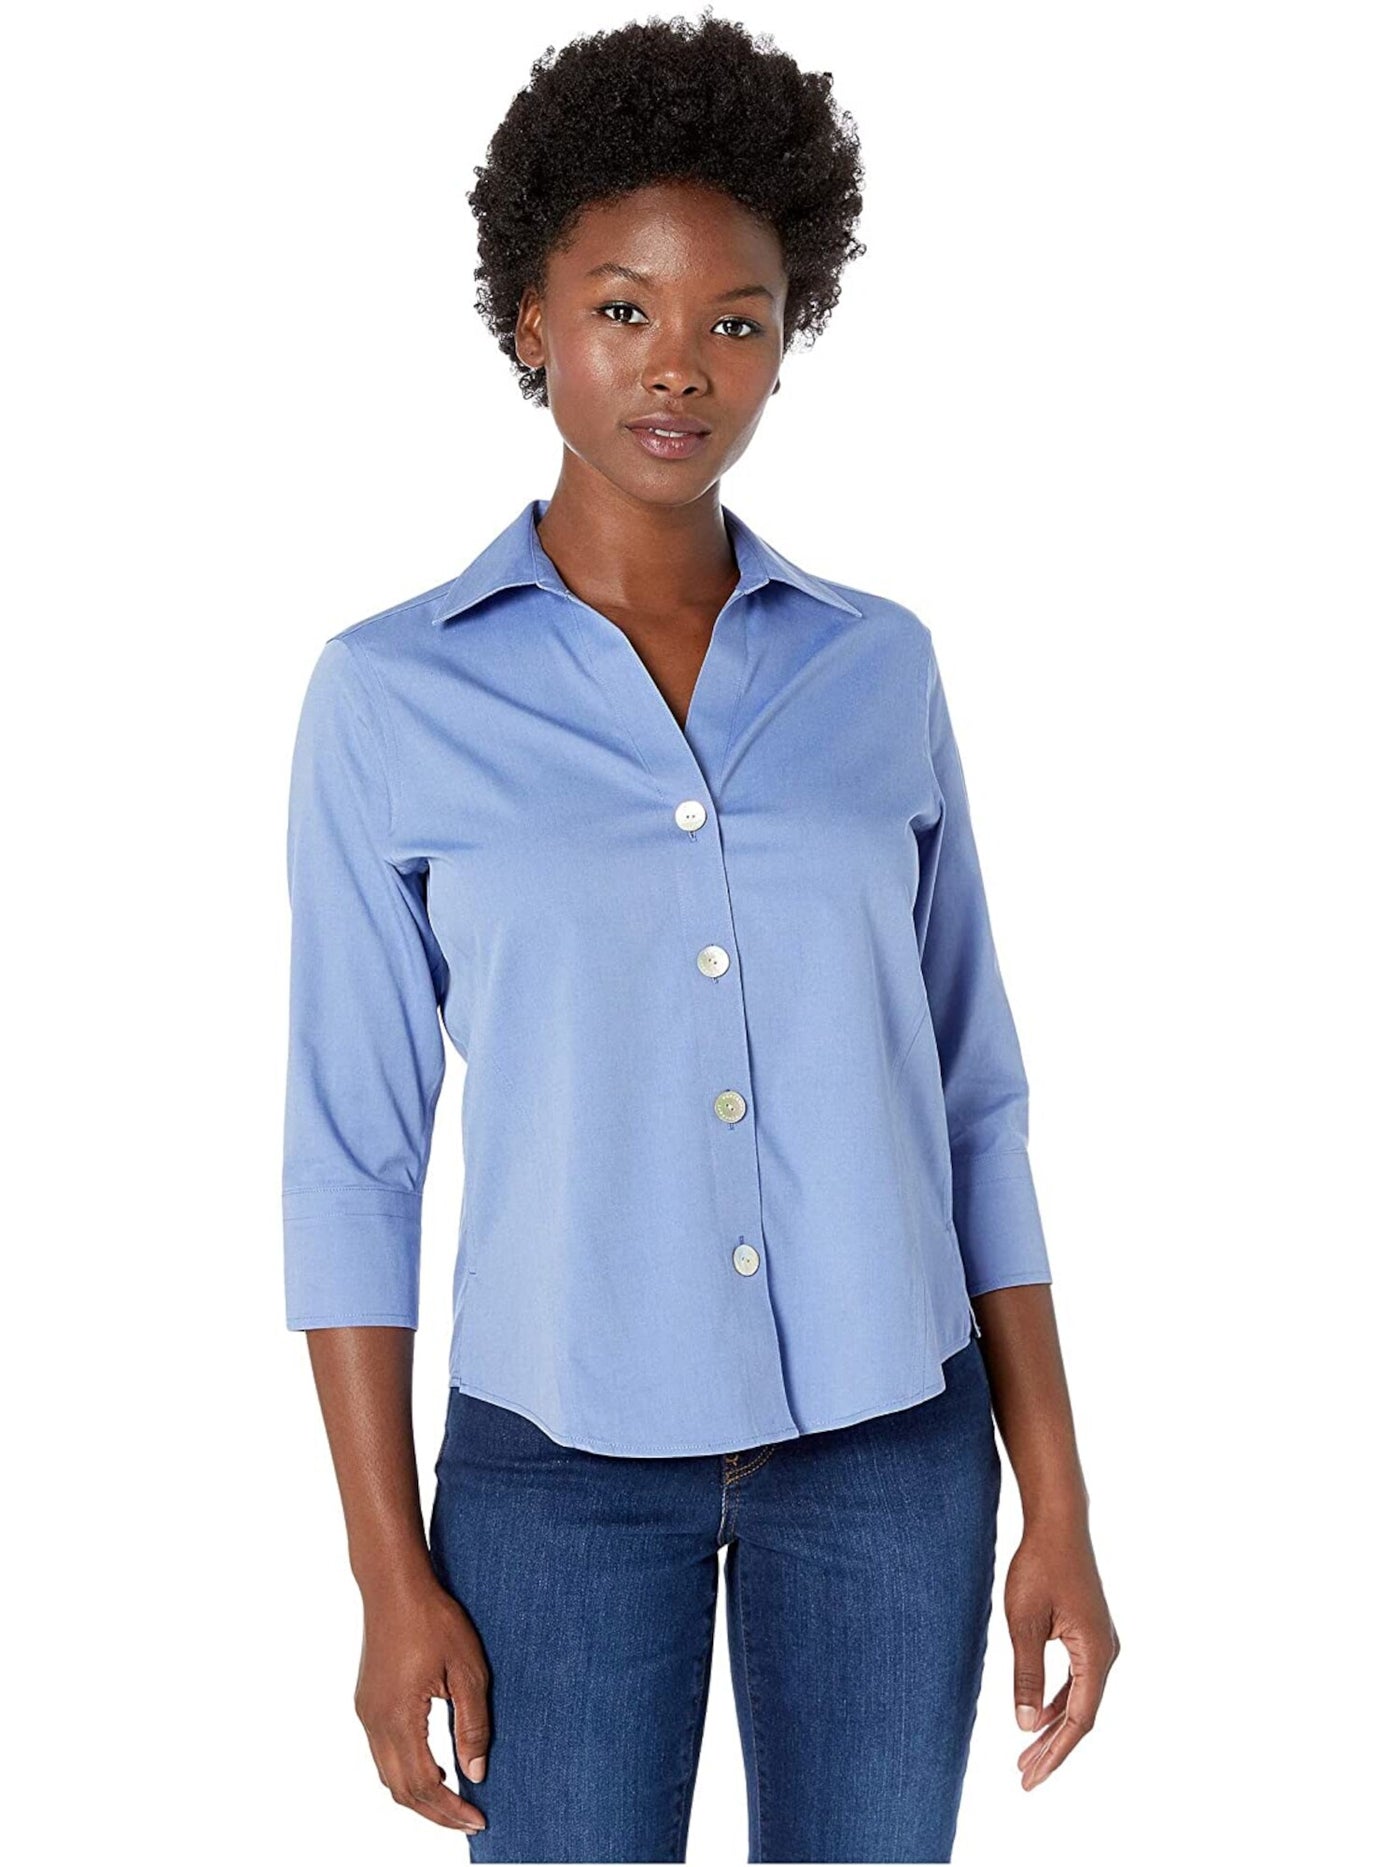 FOXCROFT Womens Blue 3/4 Sleeve Collared Button Up Top Size: 2